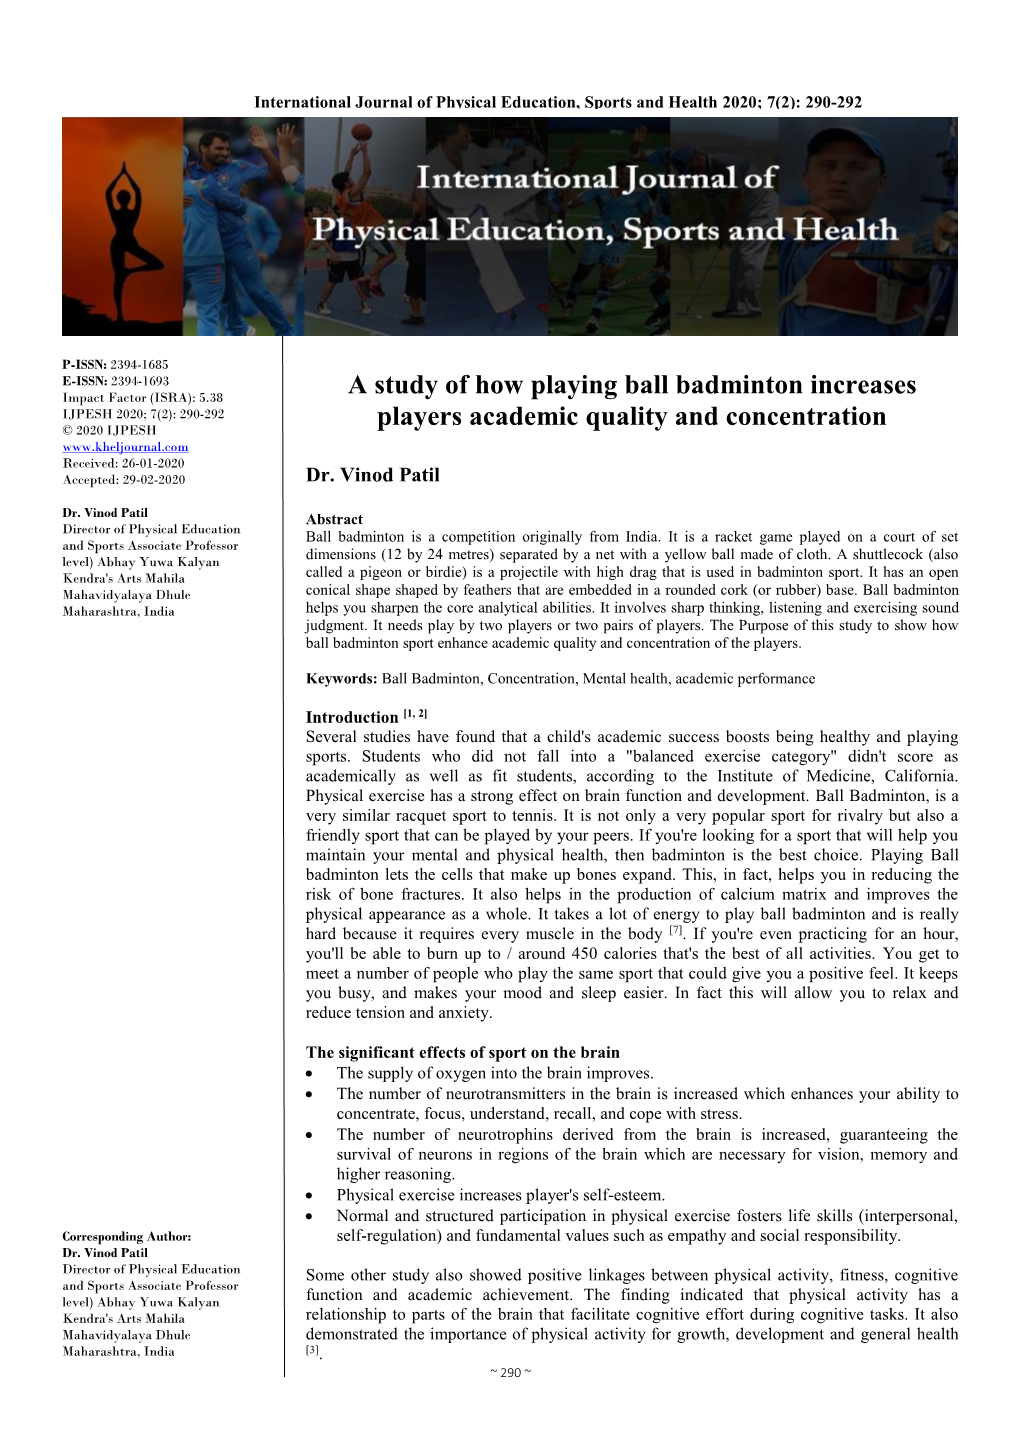 A Study of How Playing Ball Badminton Increases Players Academic Quality